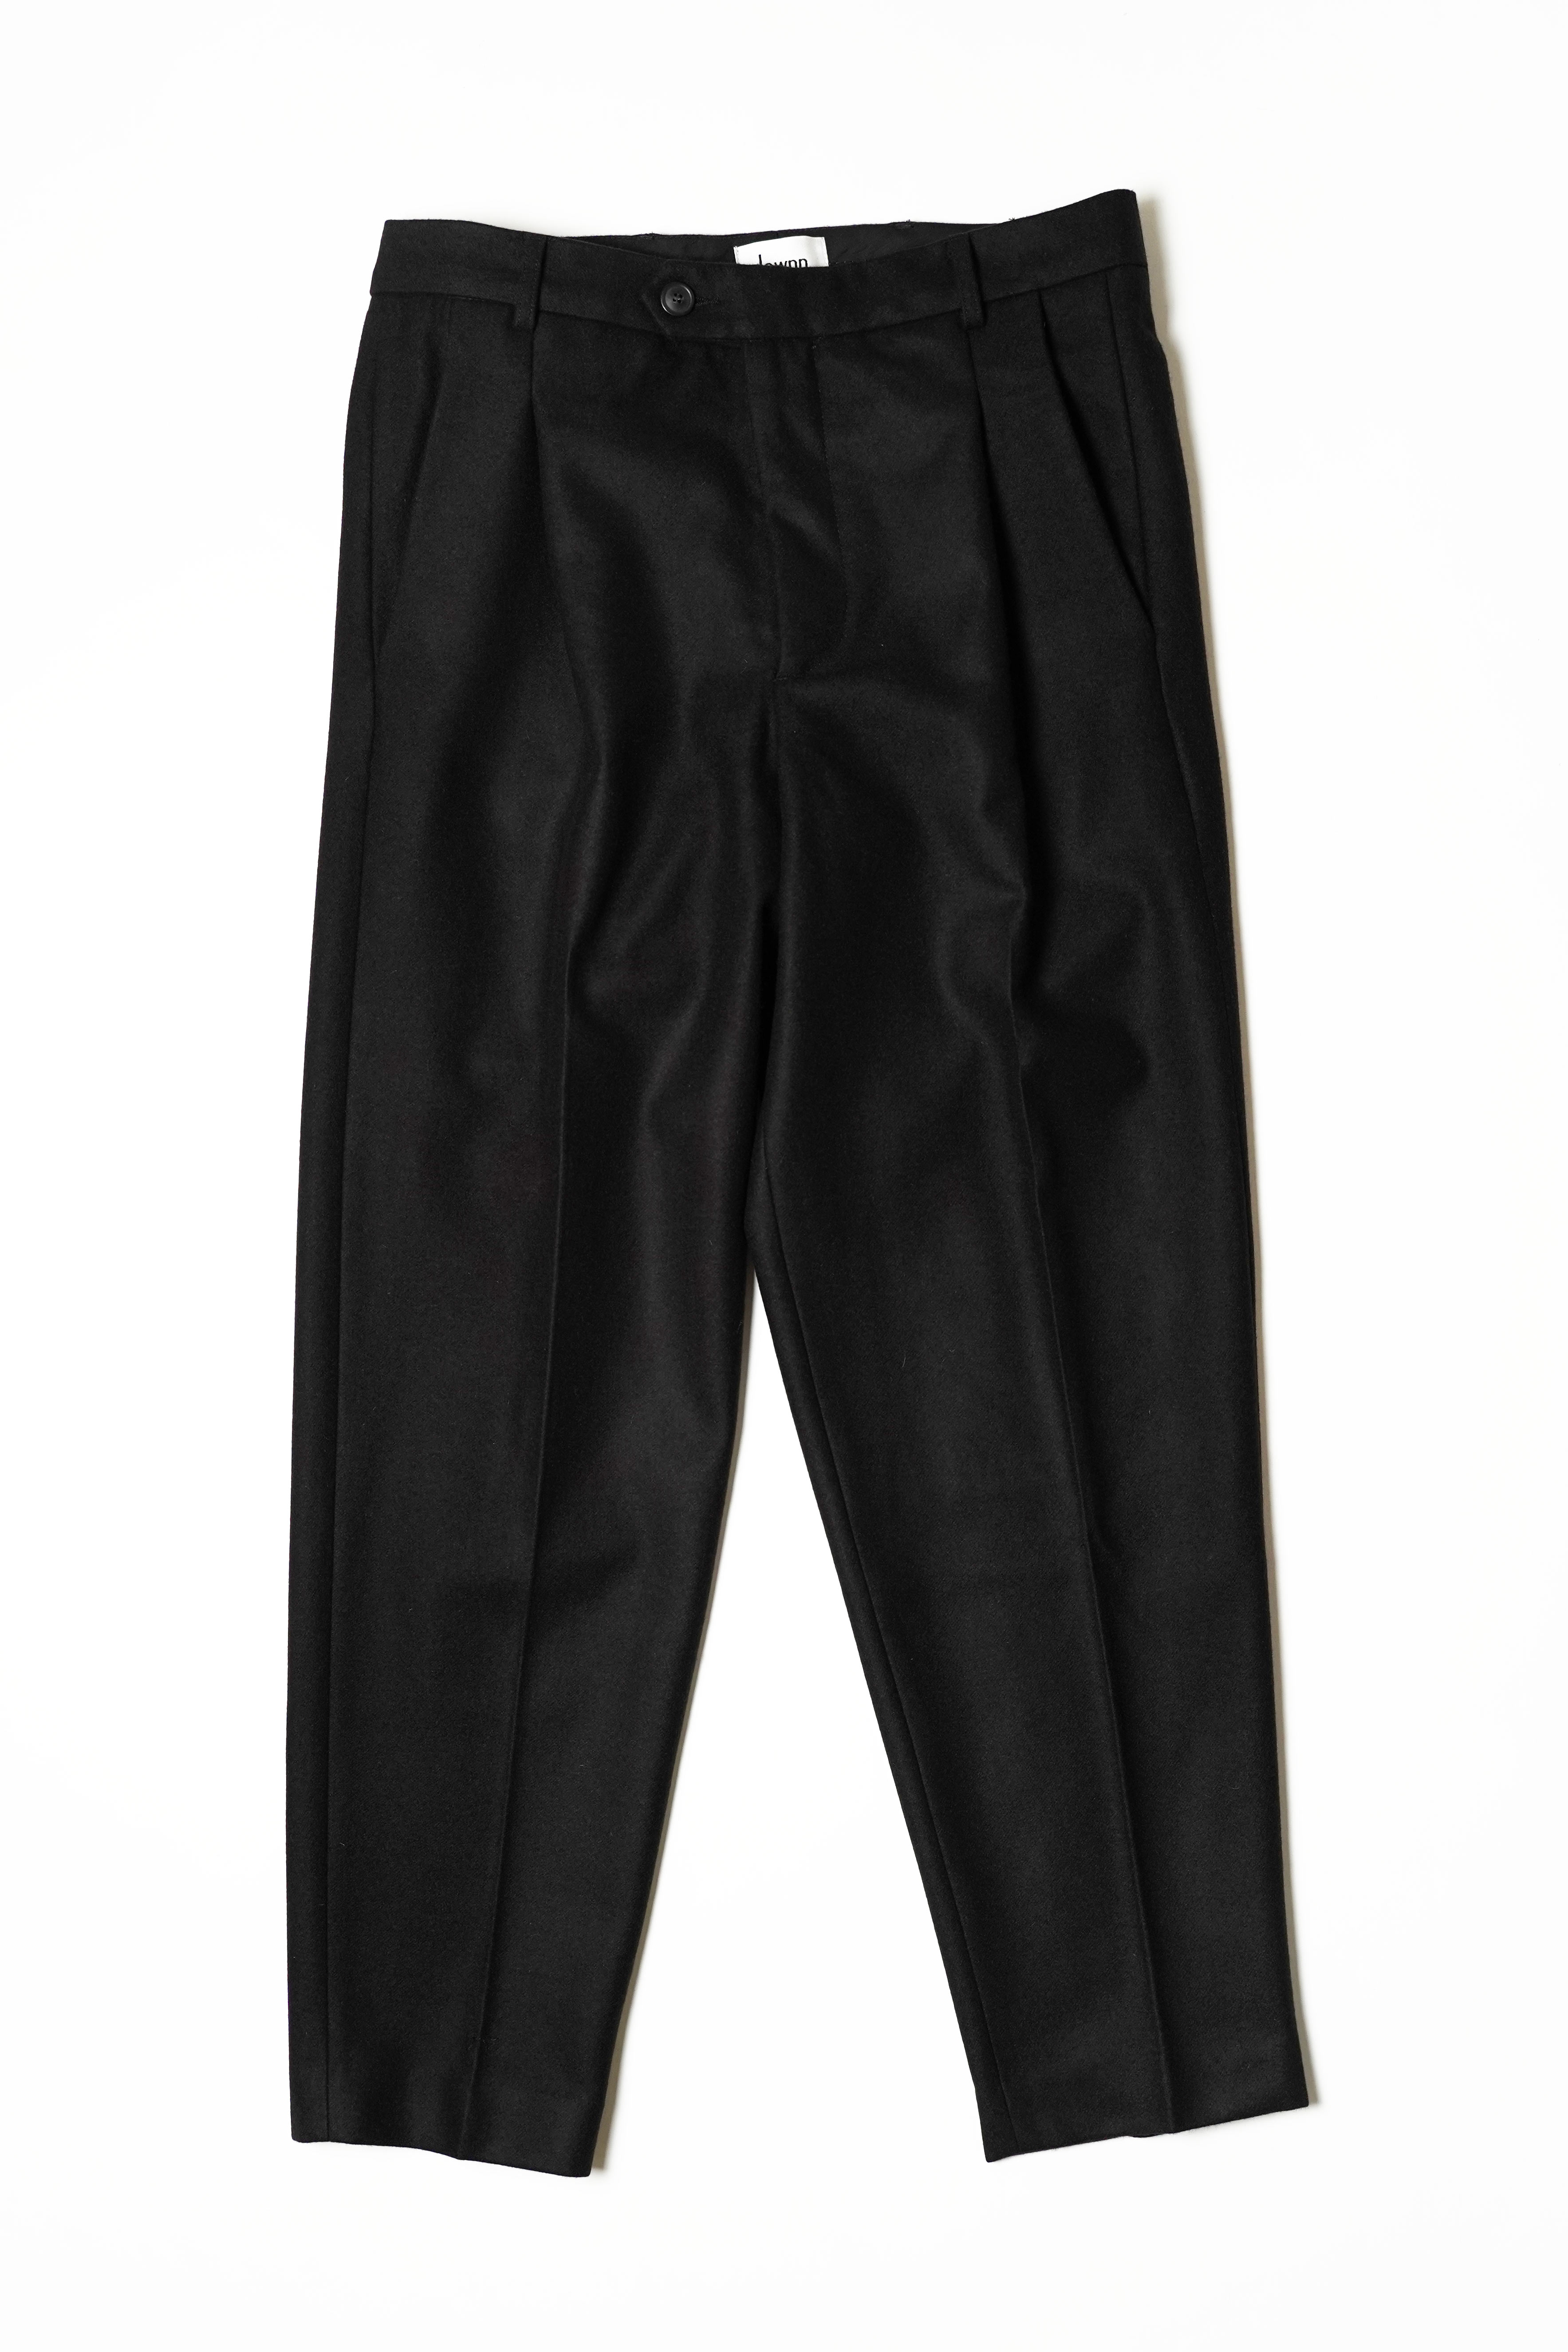 TAPERED LEGS TROUSERS BLACK